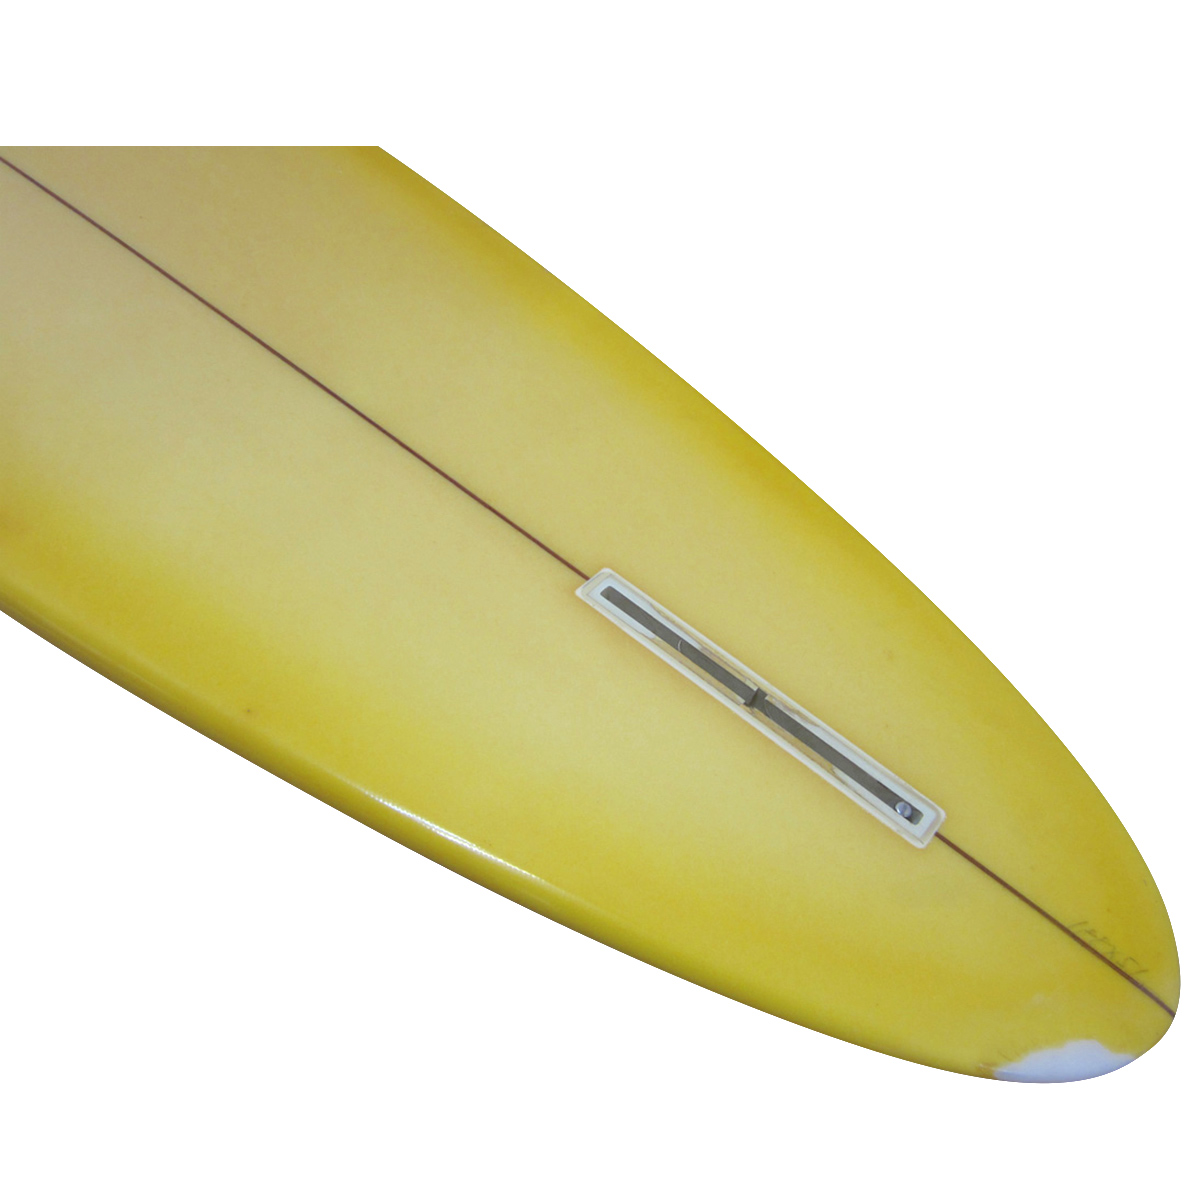 PRIMO SURFBOARDS / Vintage Single Pin 6'2